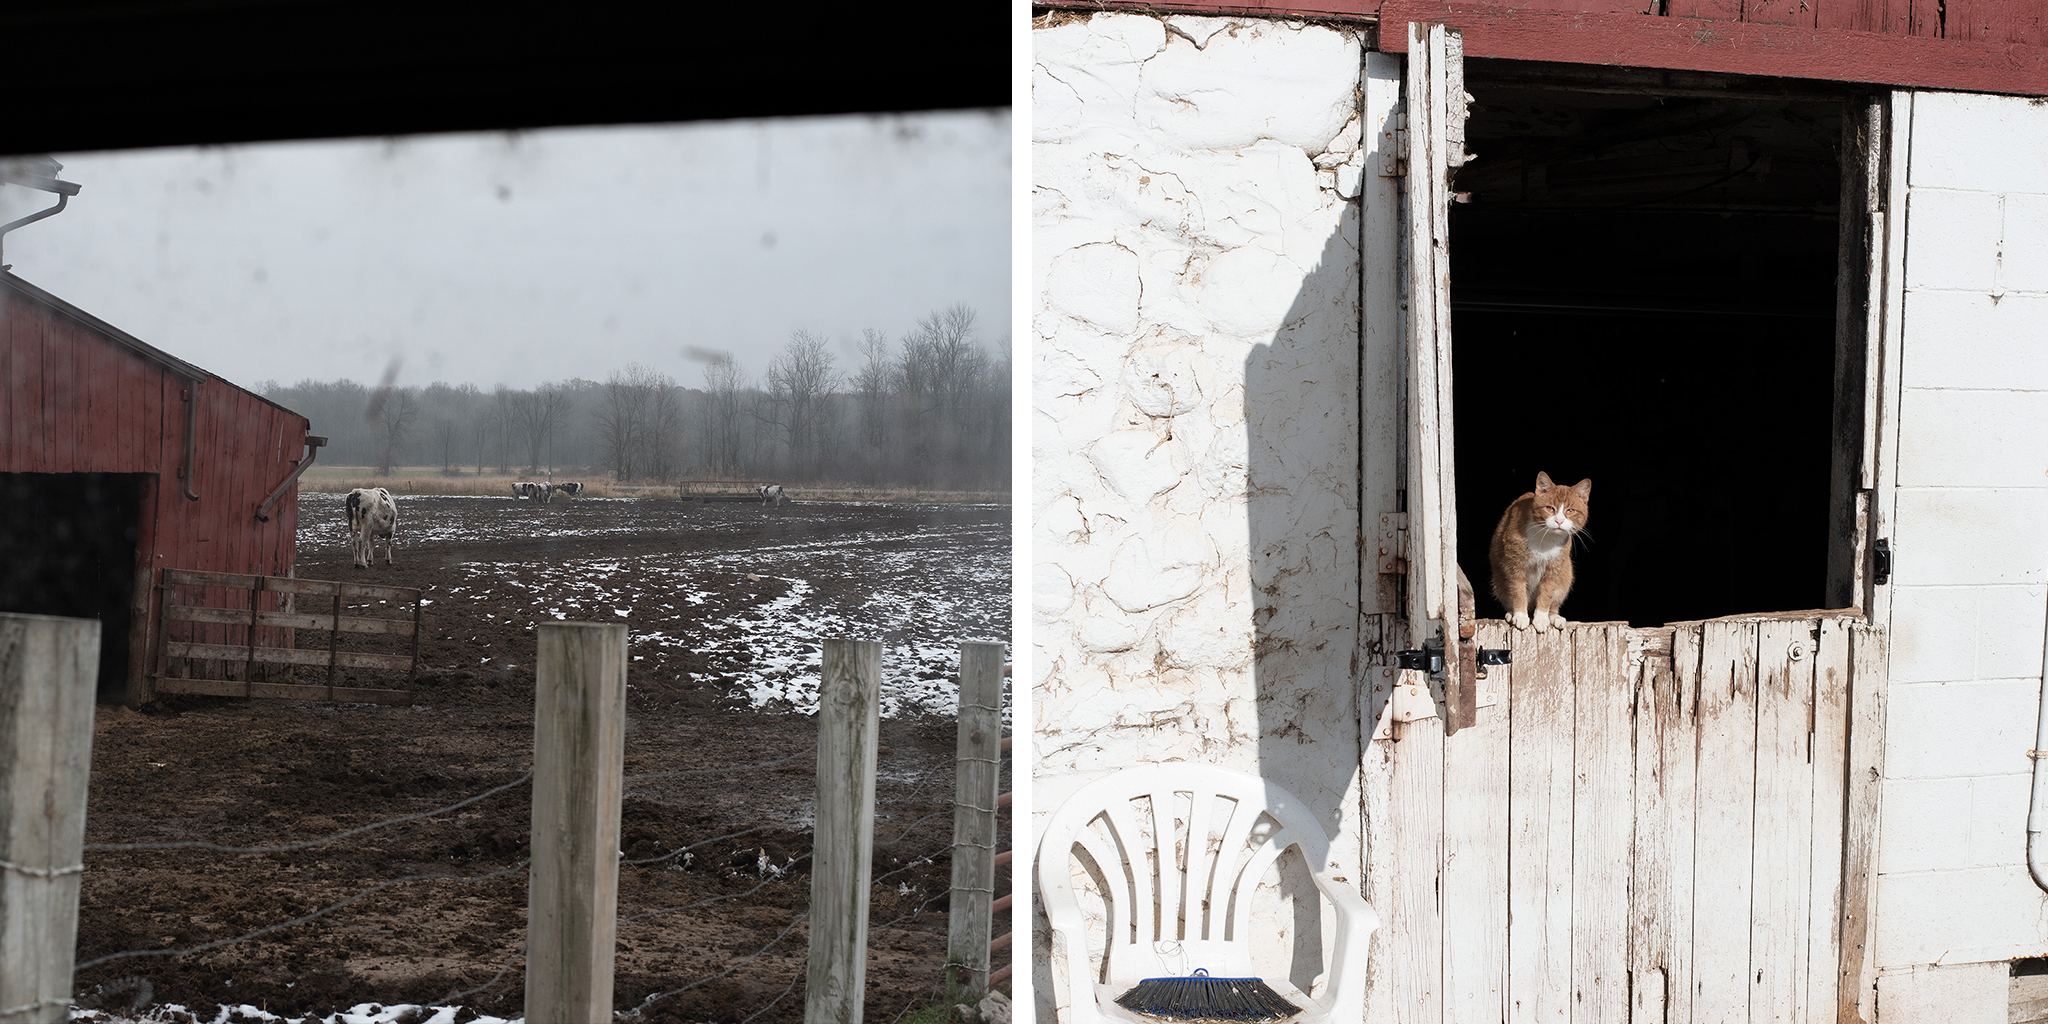 View from the barn into the cow pasture; one of the many farm cats at the entrance to the barn. (Jason Vaughn for TIME)